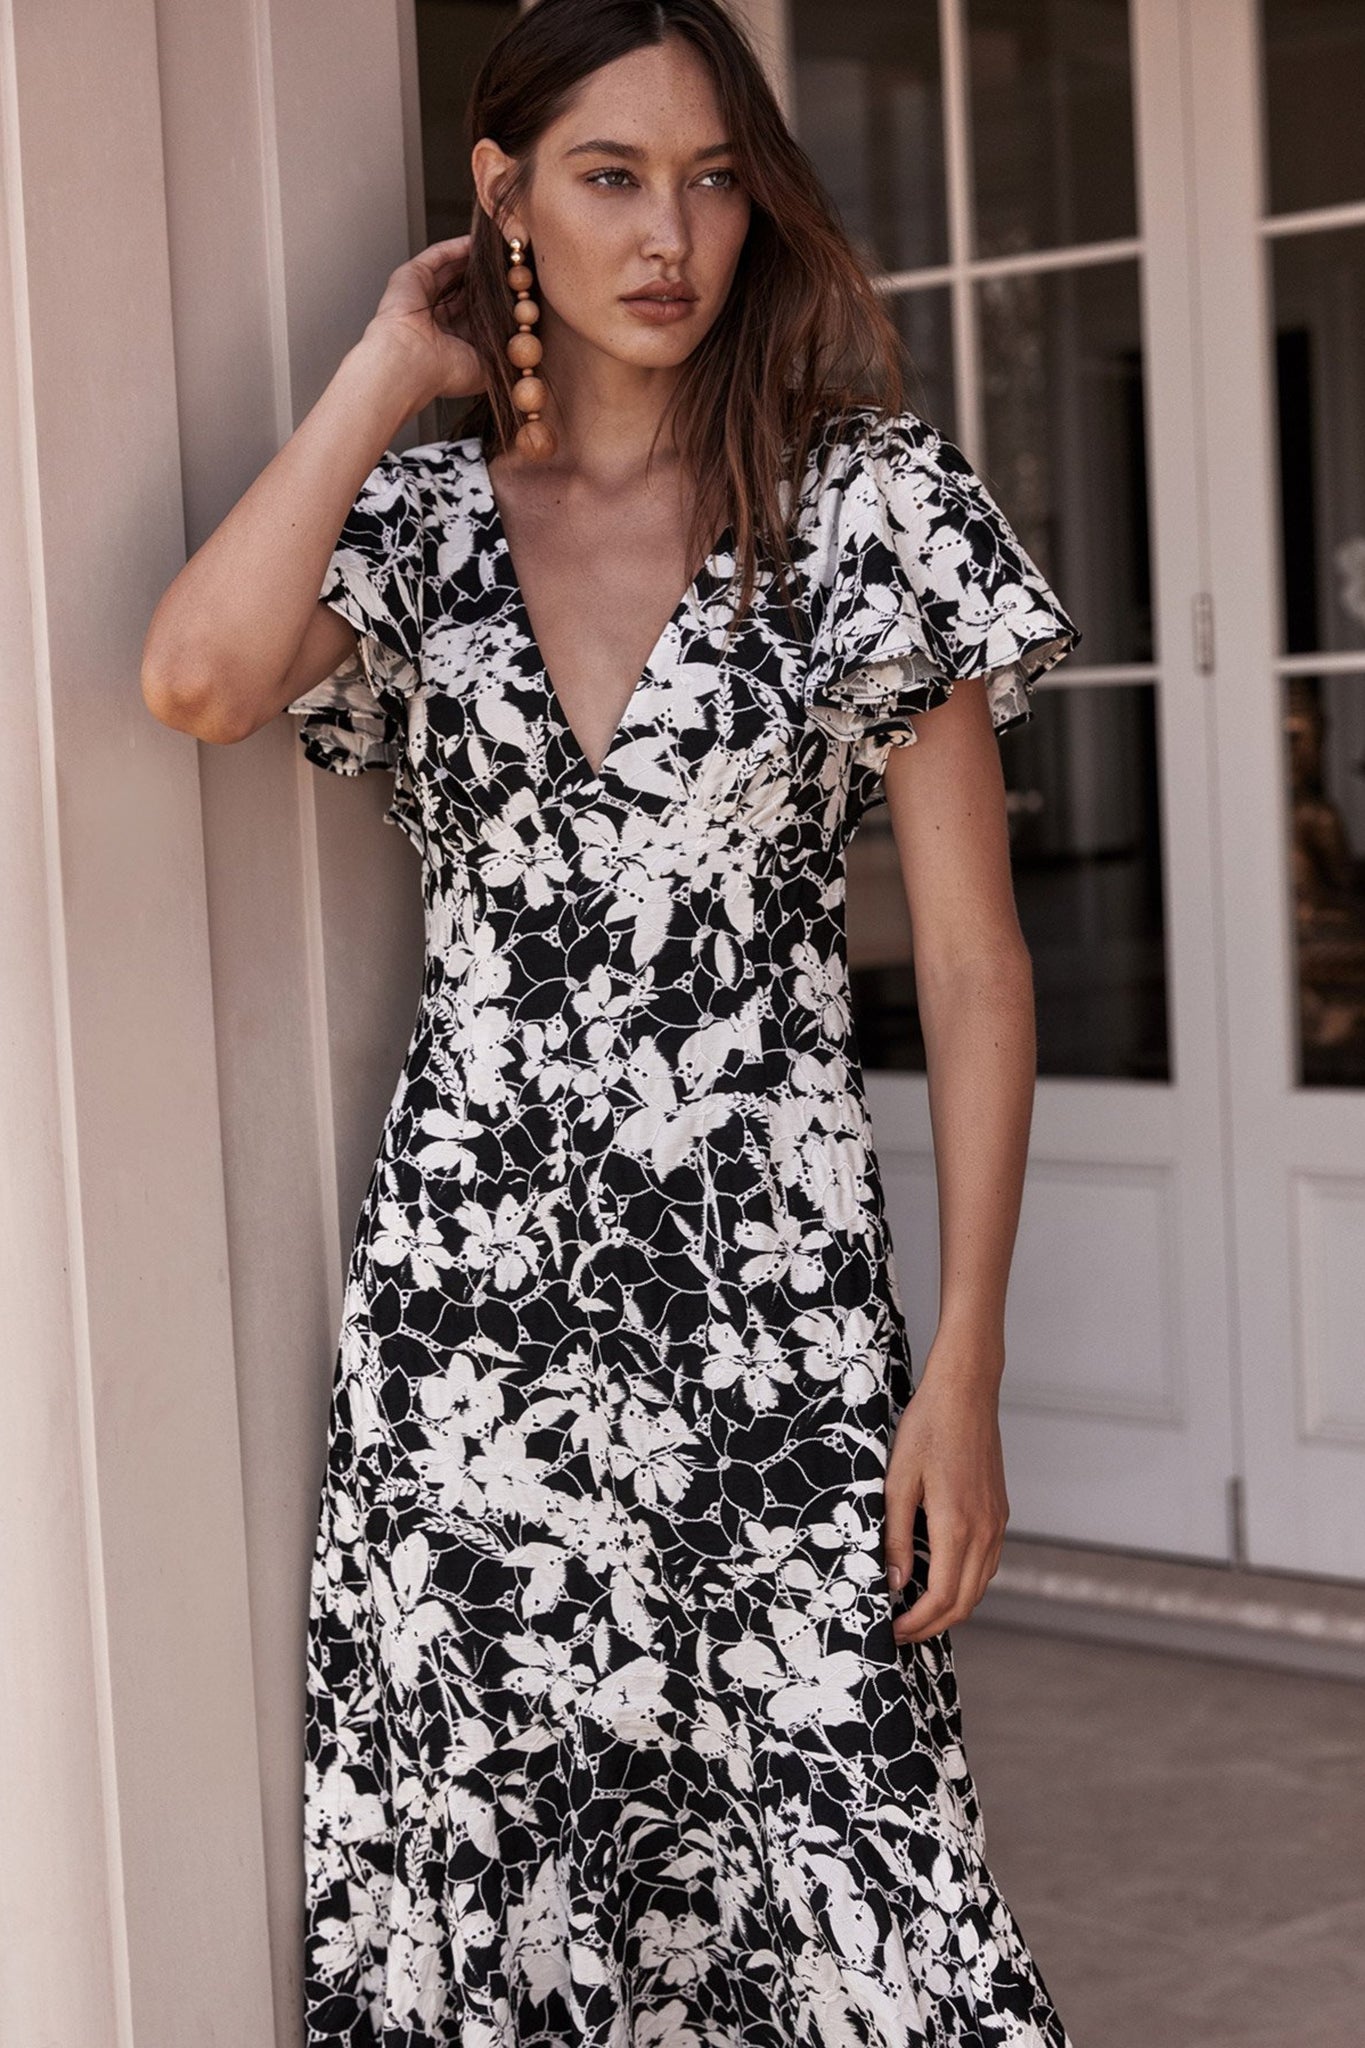 Buy Talulah The Idol Midi Dress now at Smoke and Mirrors Boutique. Buy Talulah Idol Midi Dress now with ZipPay. Buy Talulah Idol Midi Dress now with AfterPay. Buy Talulah Free Shipping over $100. 